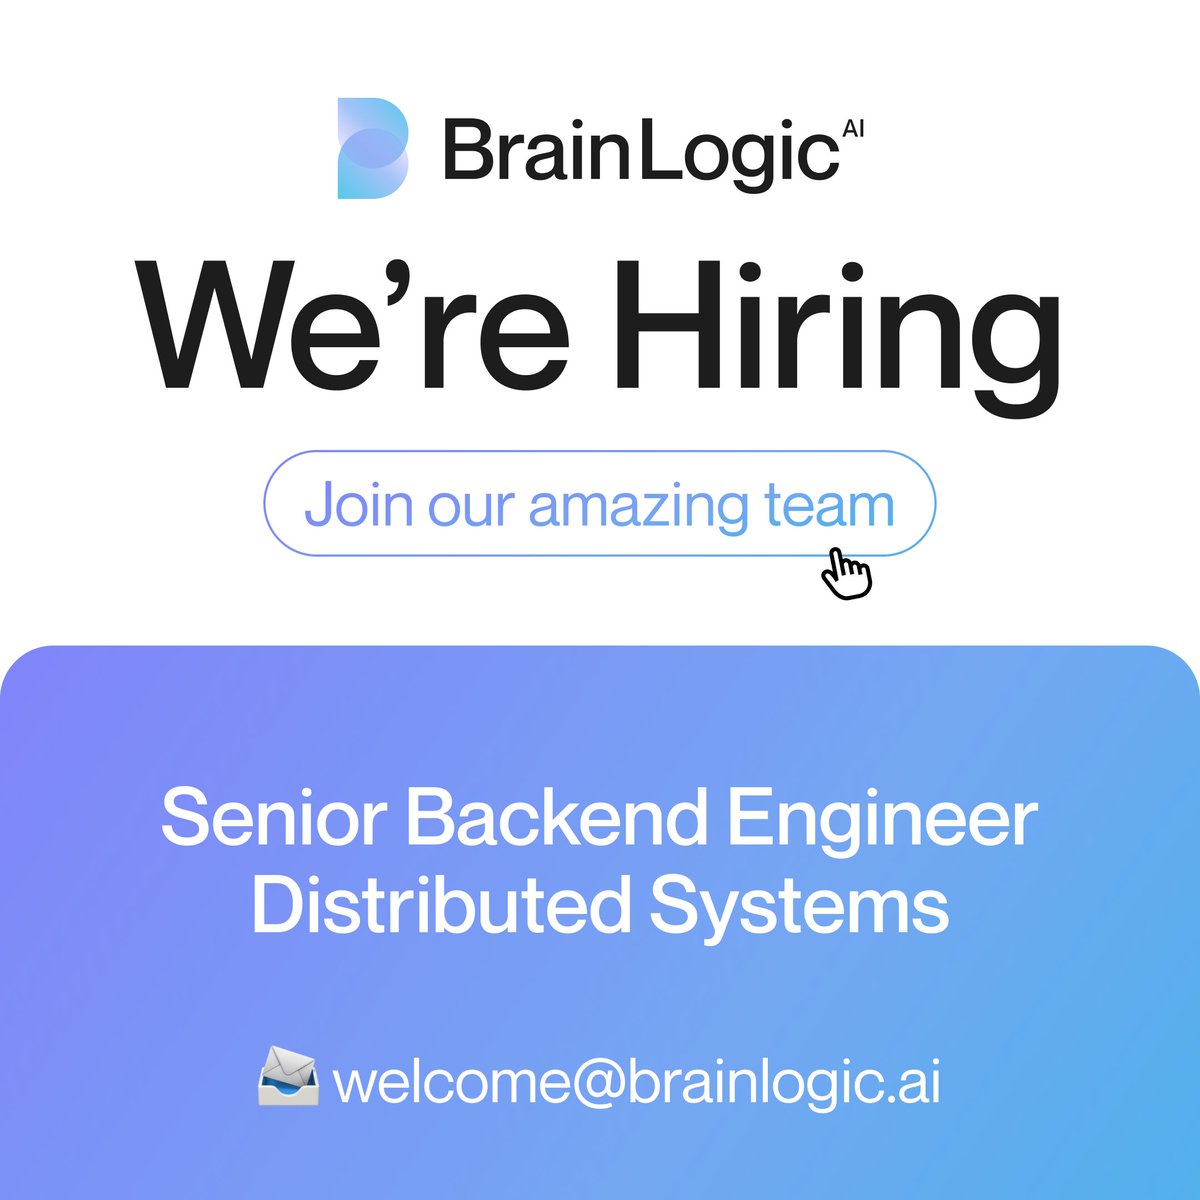 Join us in the journey of improving the lives of over 100 million people in LATAM using #AI. We are looking for an amazing Senior Backend Engineer. @BrainLogicAI